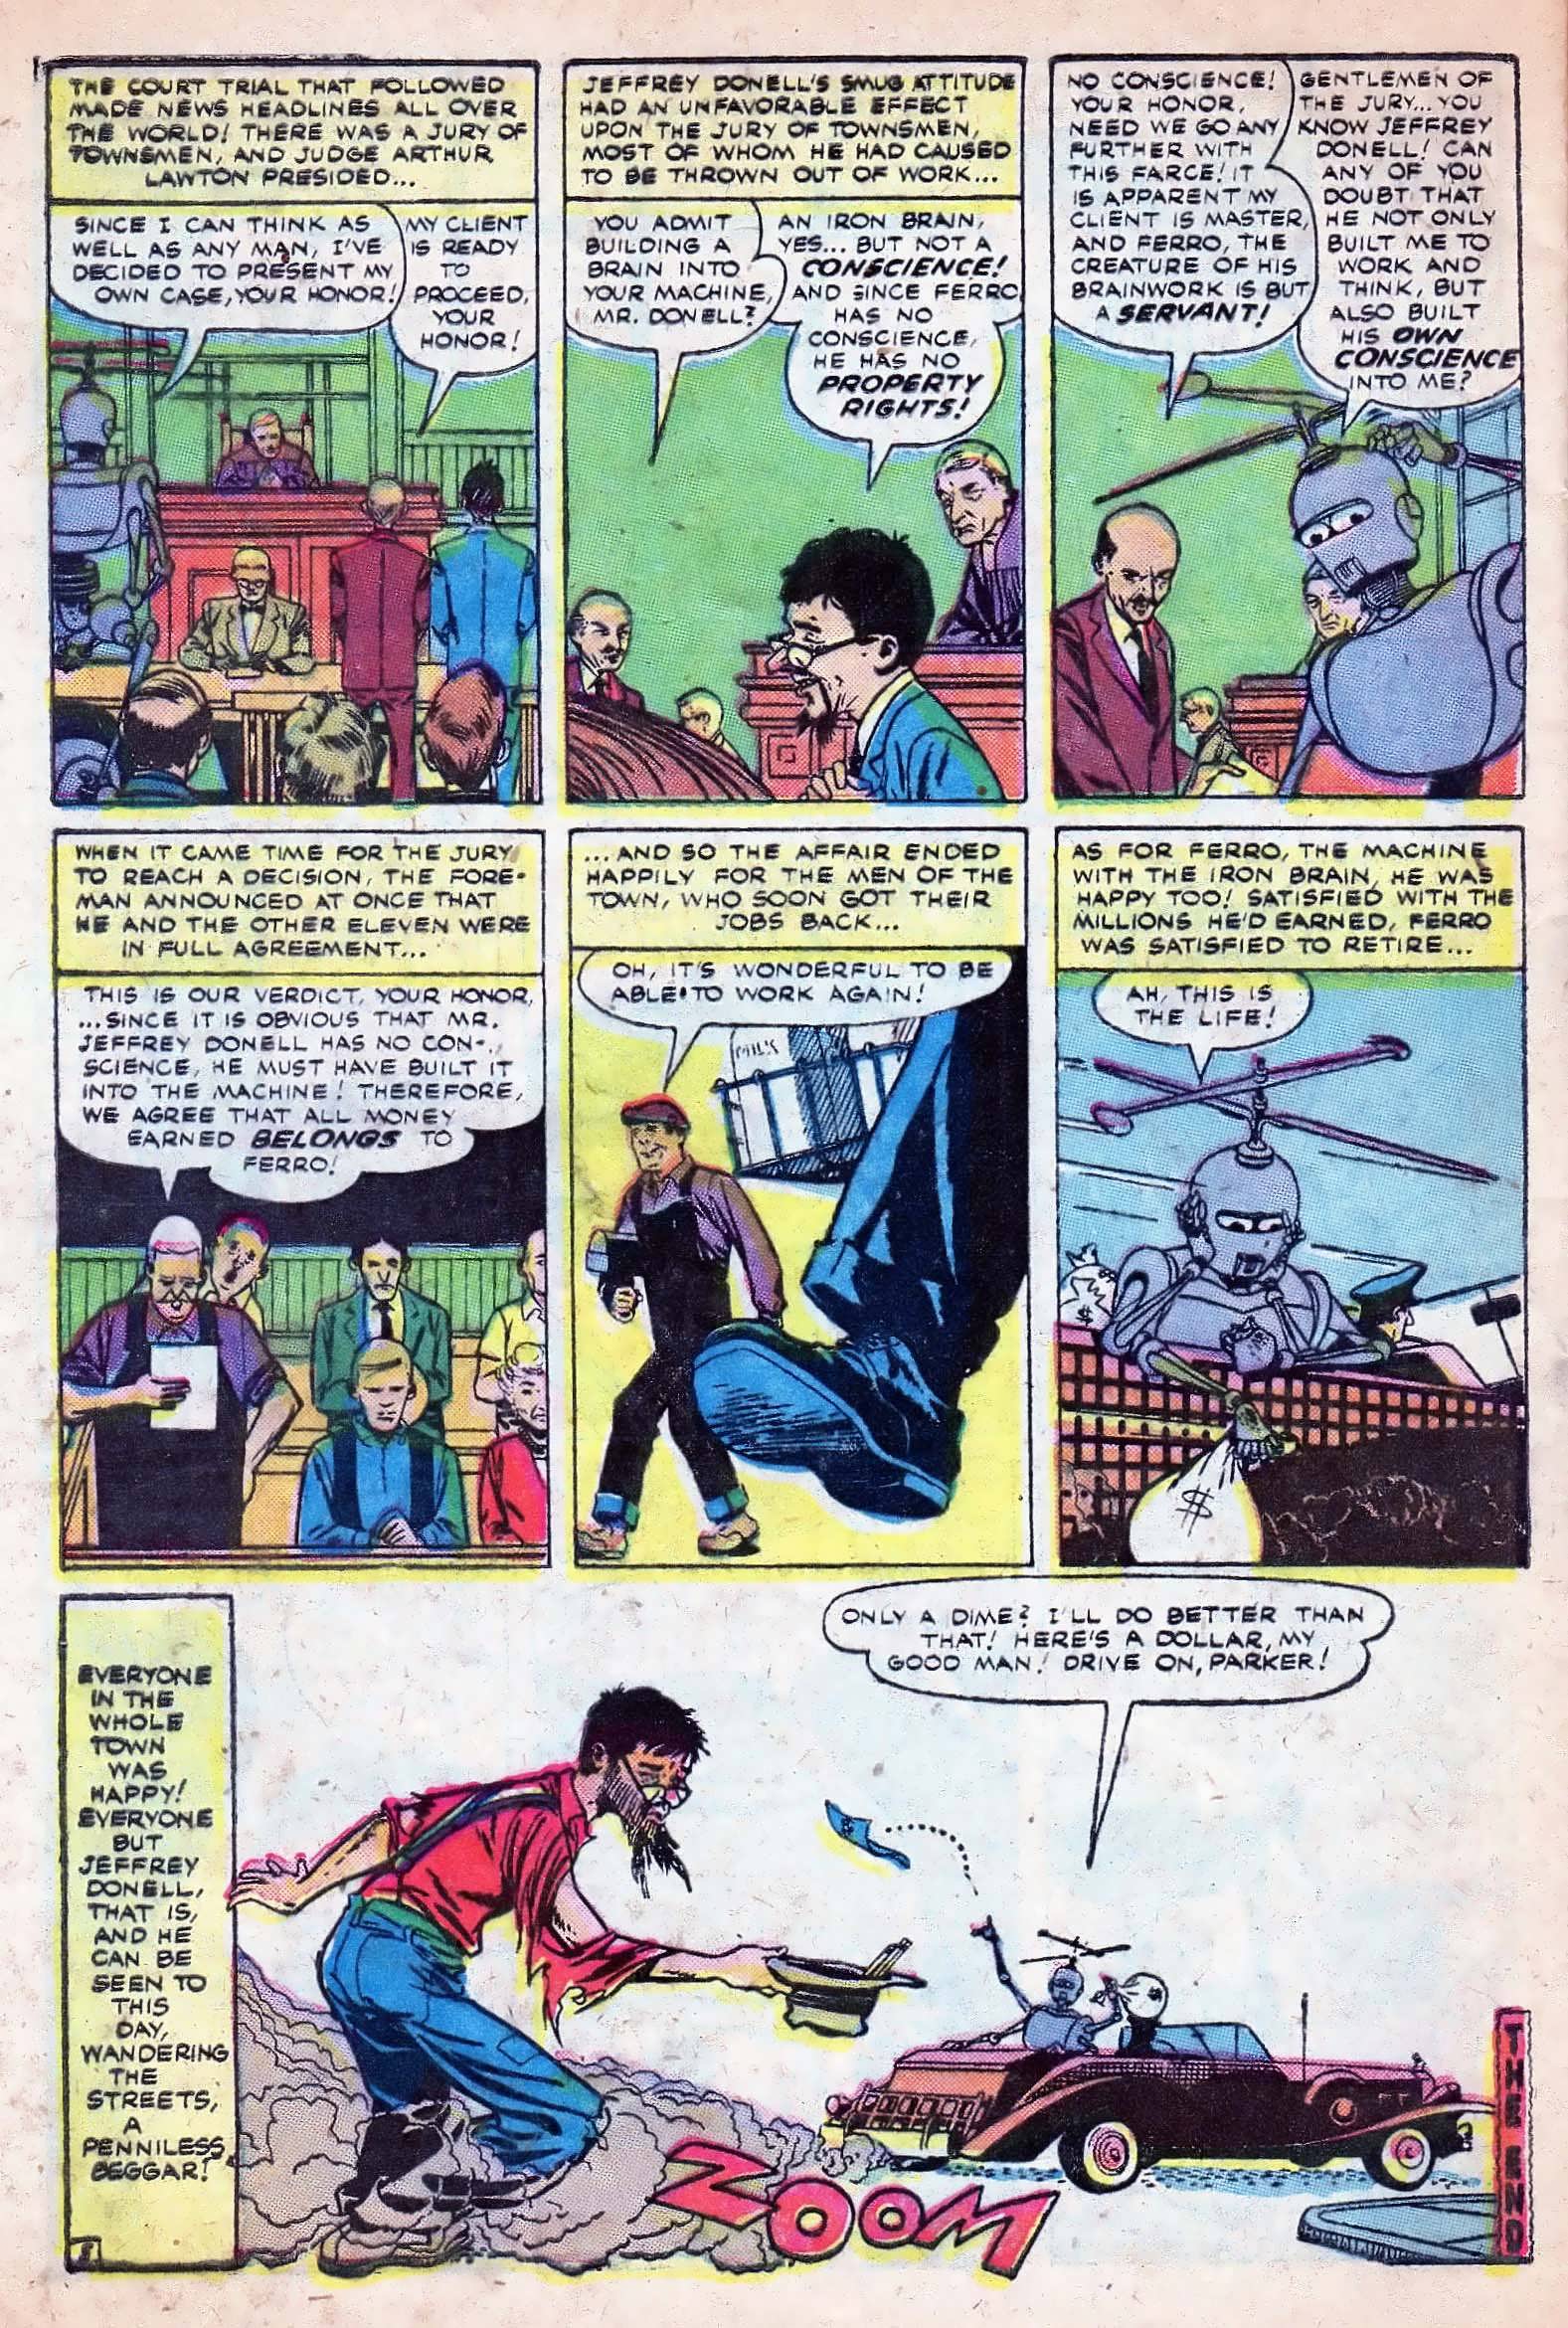 Marvel Tales (1949) 141 Page 31